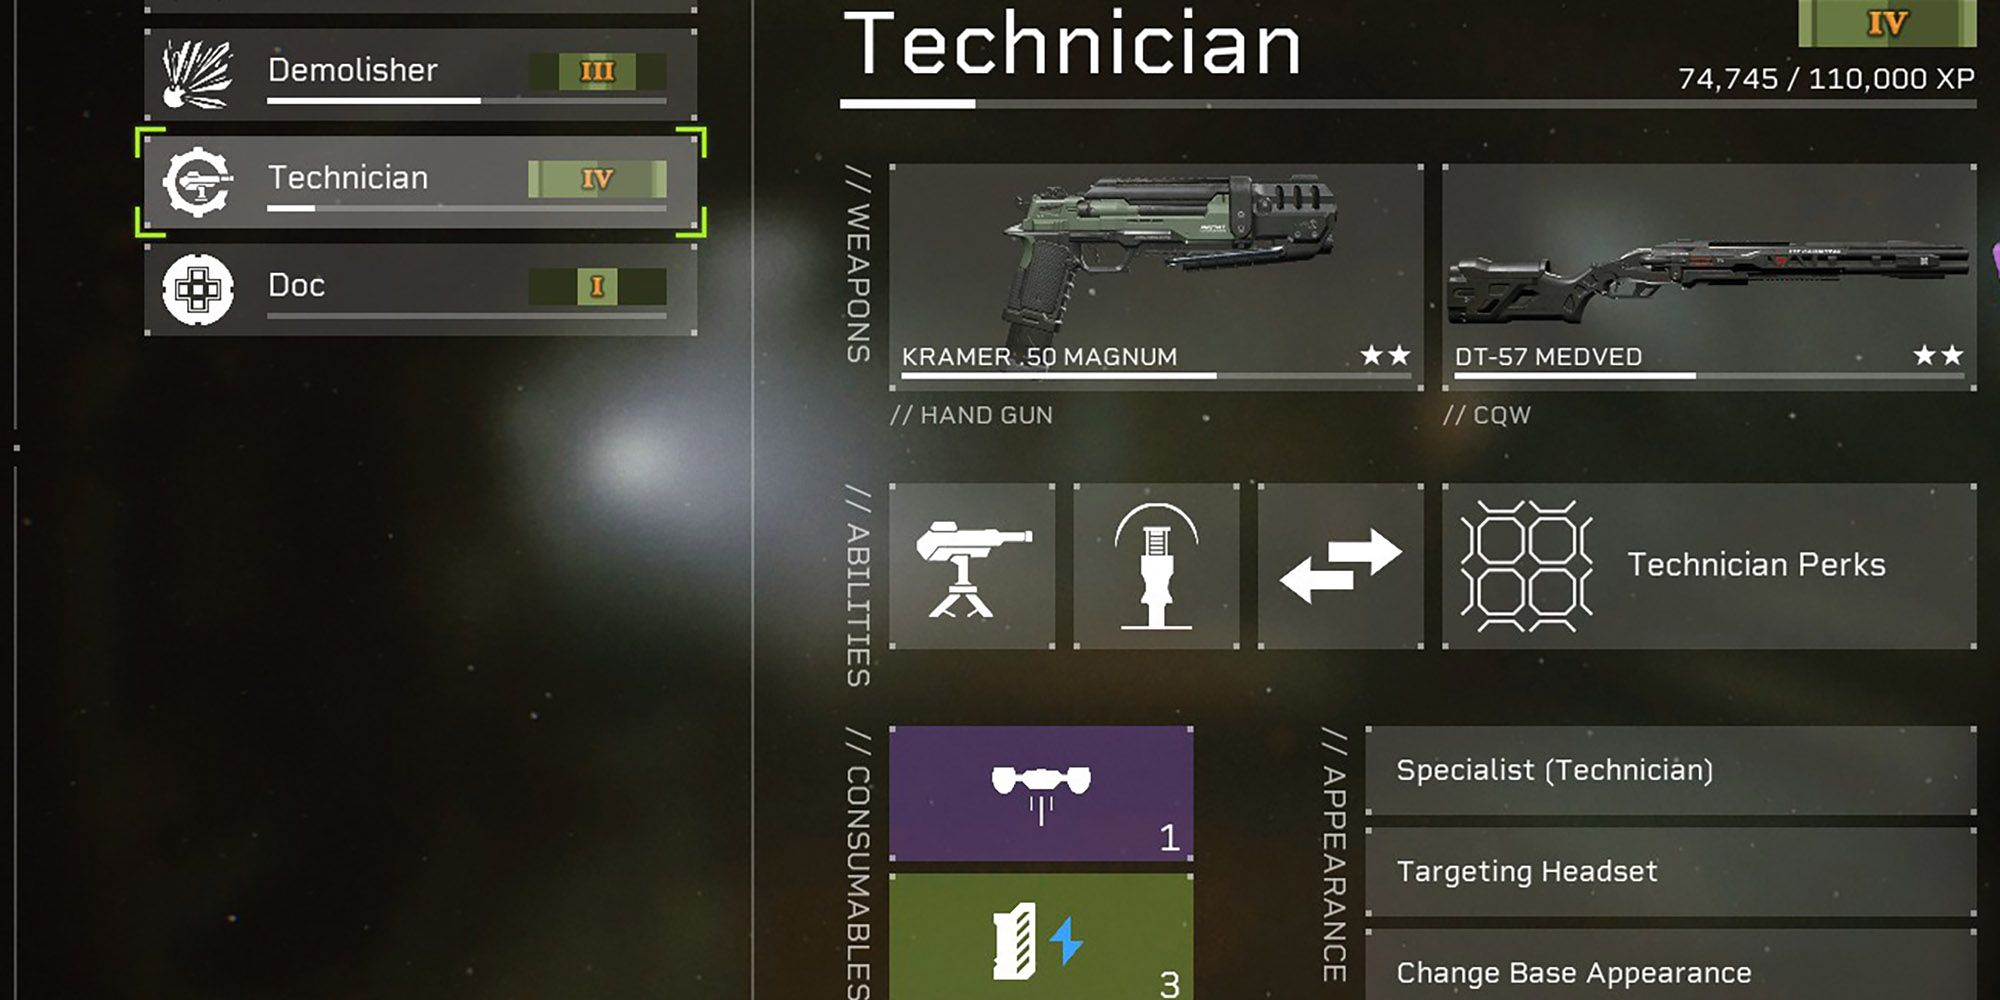 A Technician loadout screen with its weapons.